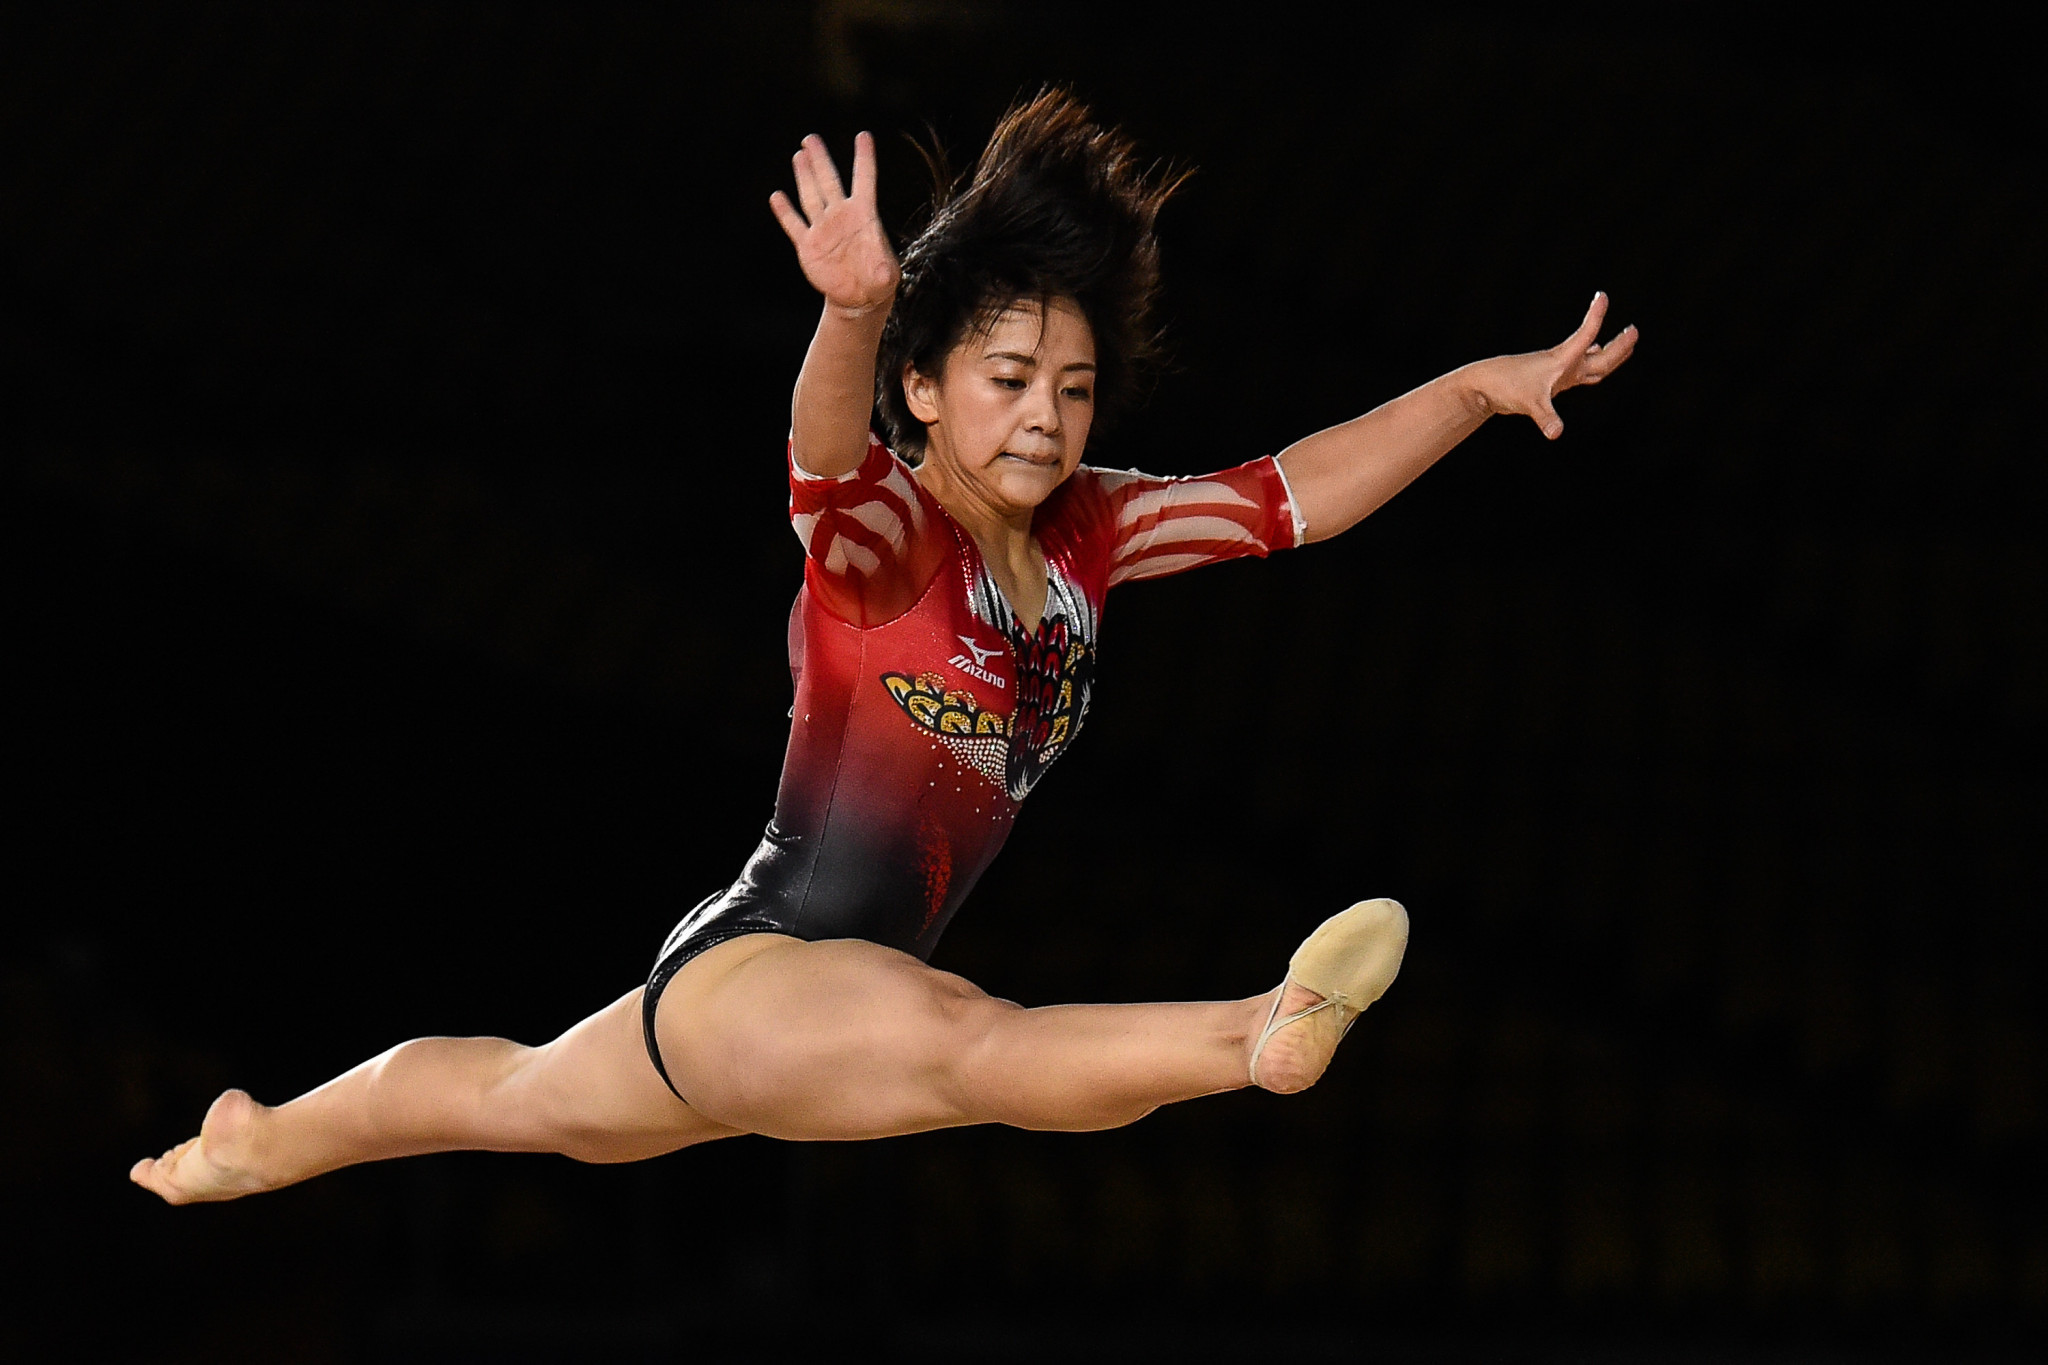 Murakami finishes top of women's all-around qualification at Artistic Gymnastics World Championships